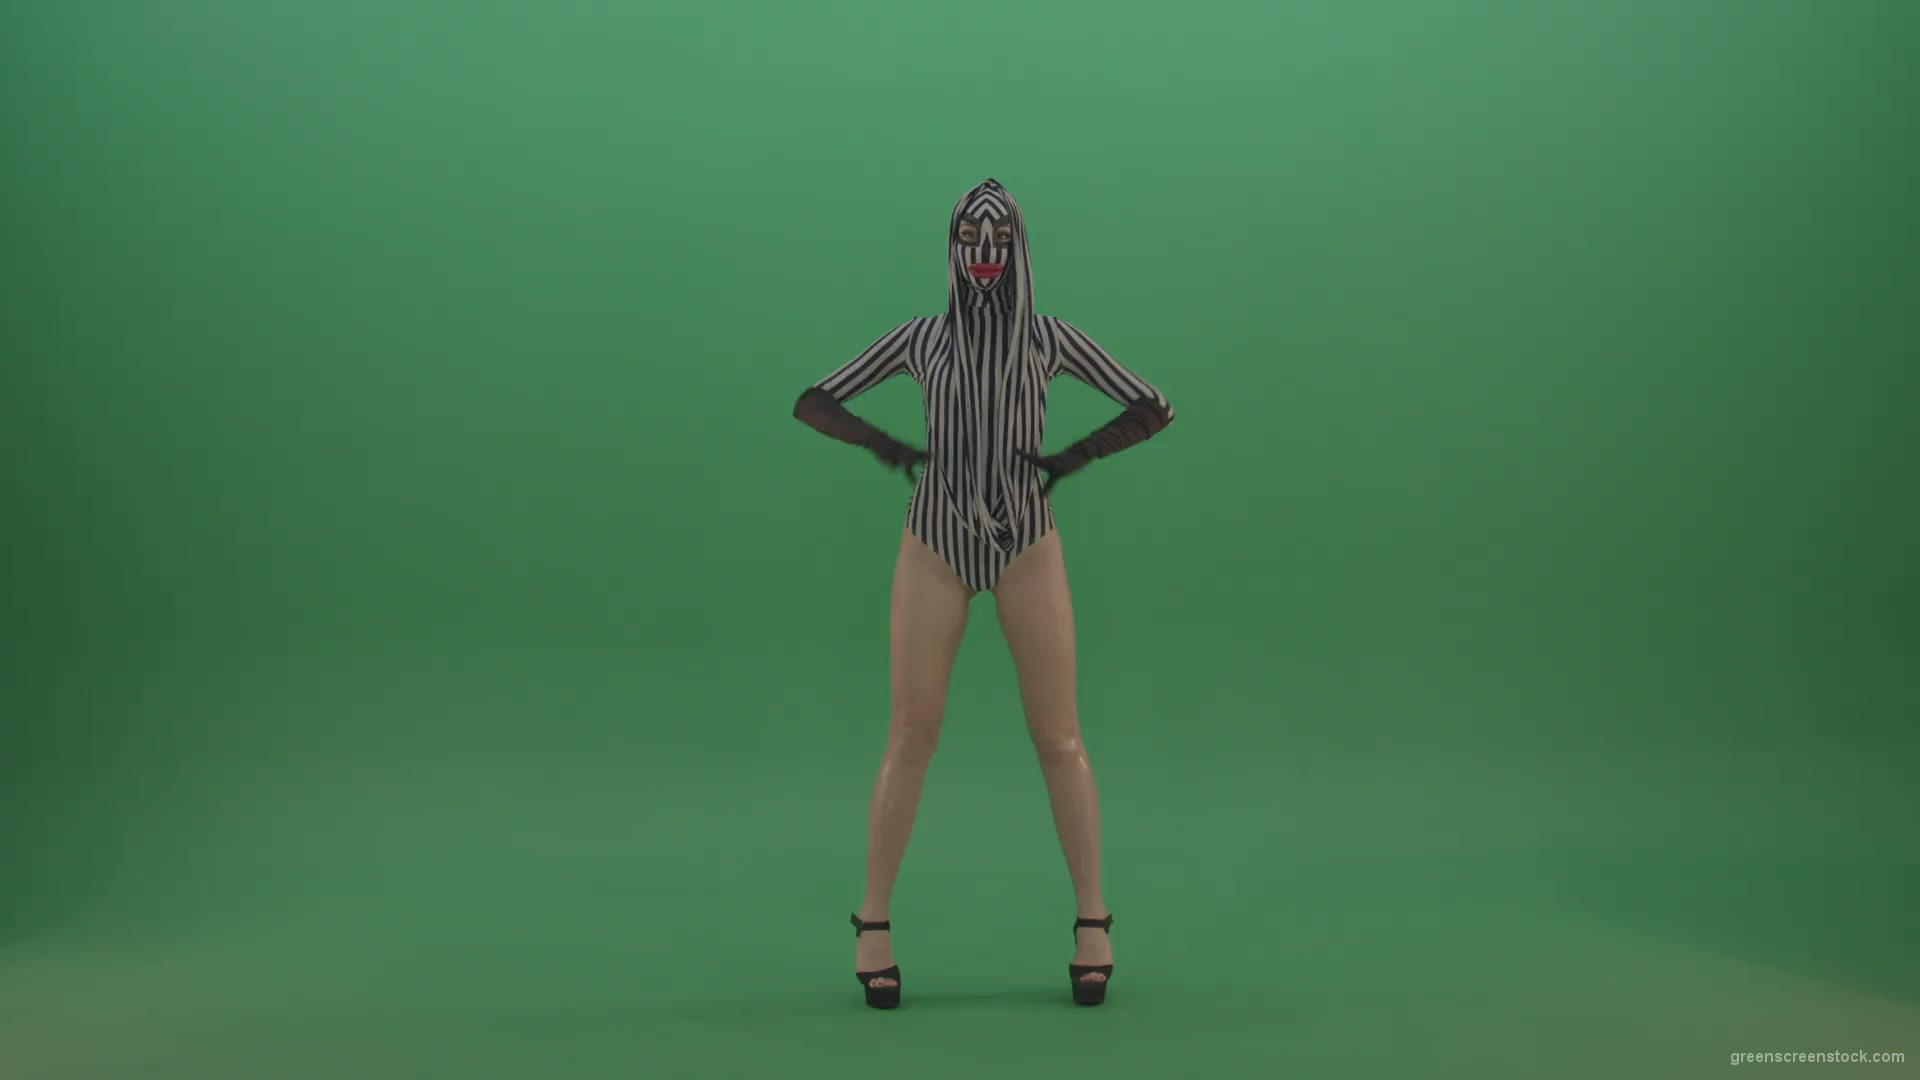 Ass-shake-beats-by-edm-go-go-girl-dance-isolated-on-green-screen-1920_001 Green Screen Stock